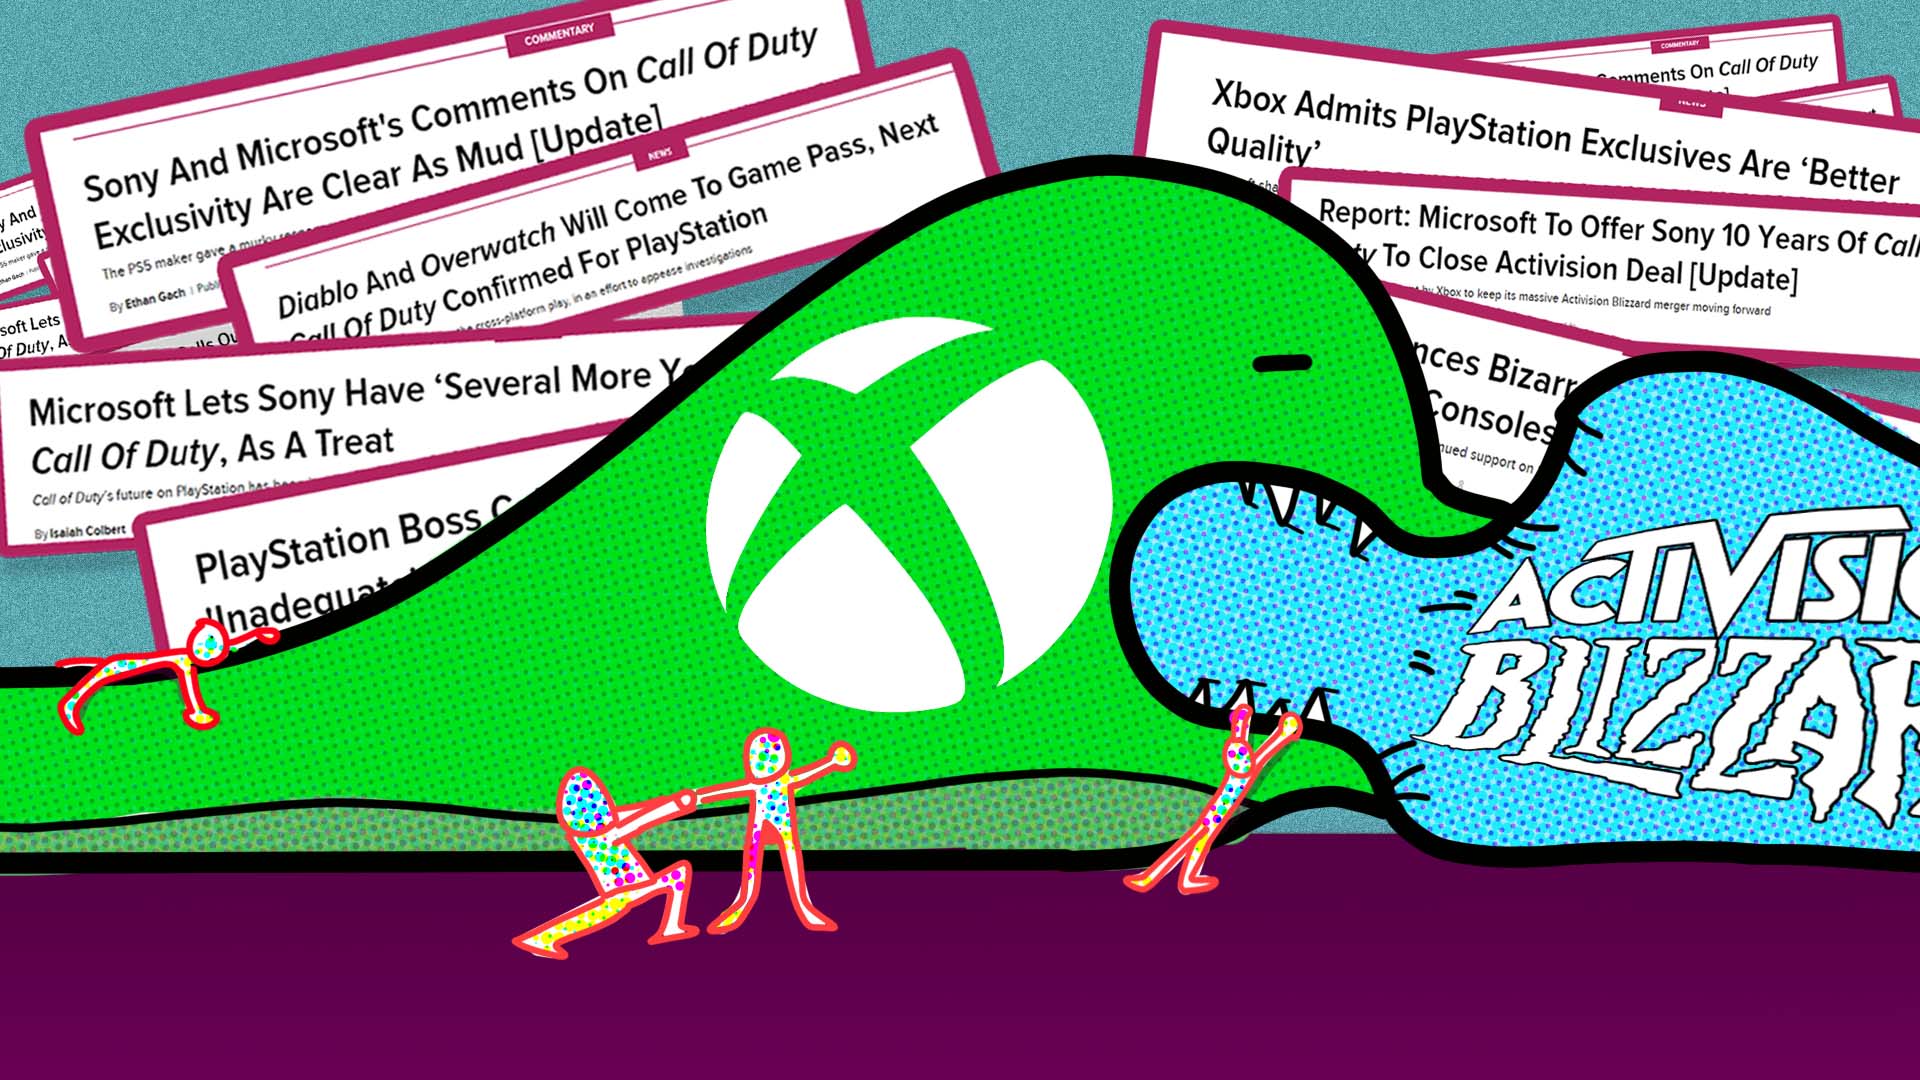 Xbox's Phil Spencer: We need Candy Crush, not Call of Duty